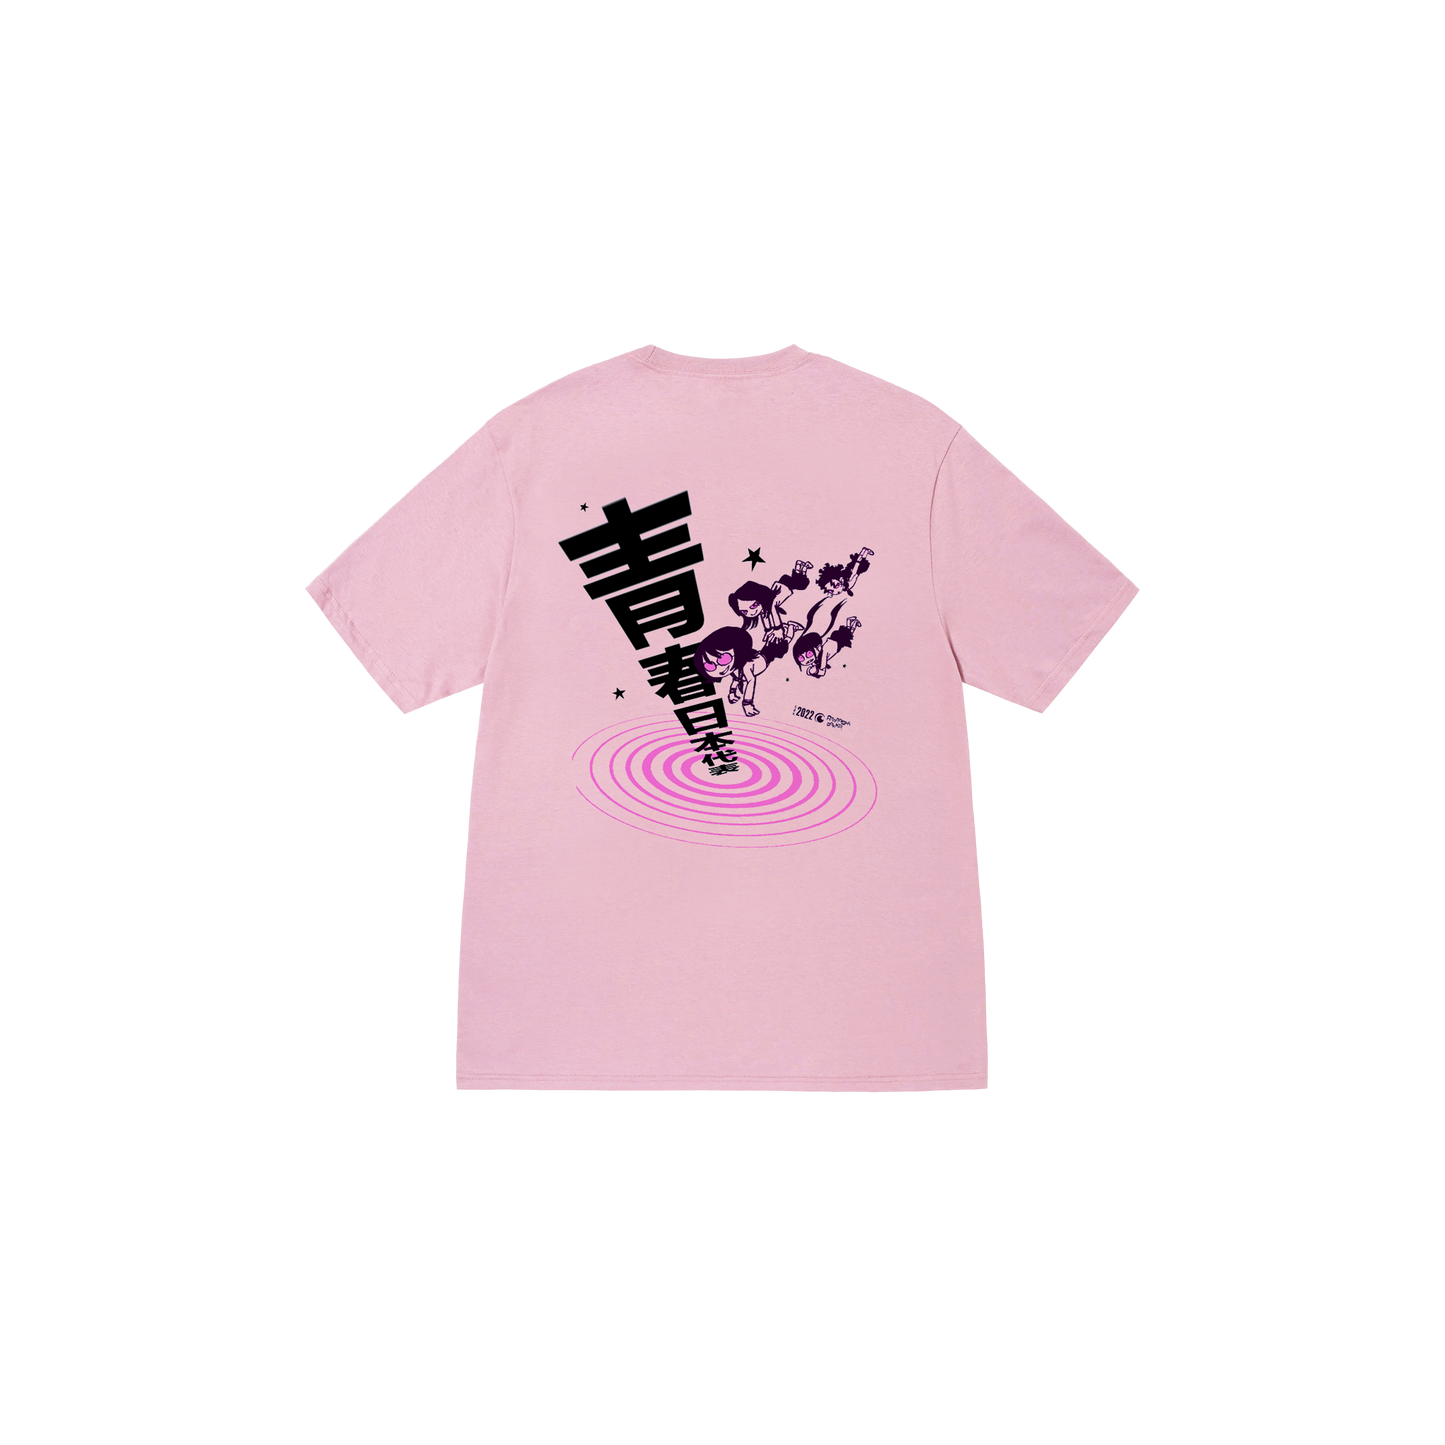 AG Limited Edition Pink Tee